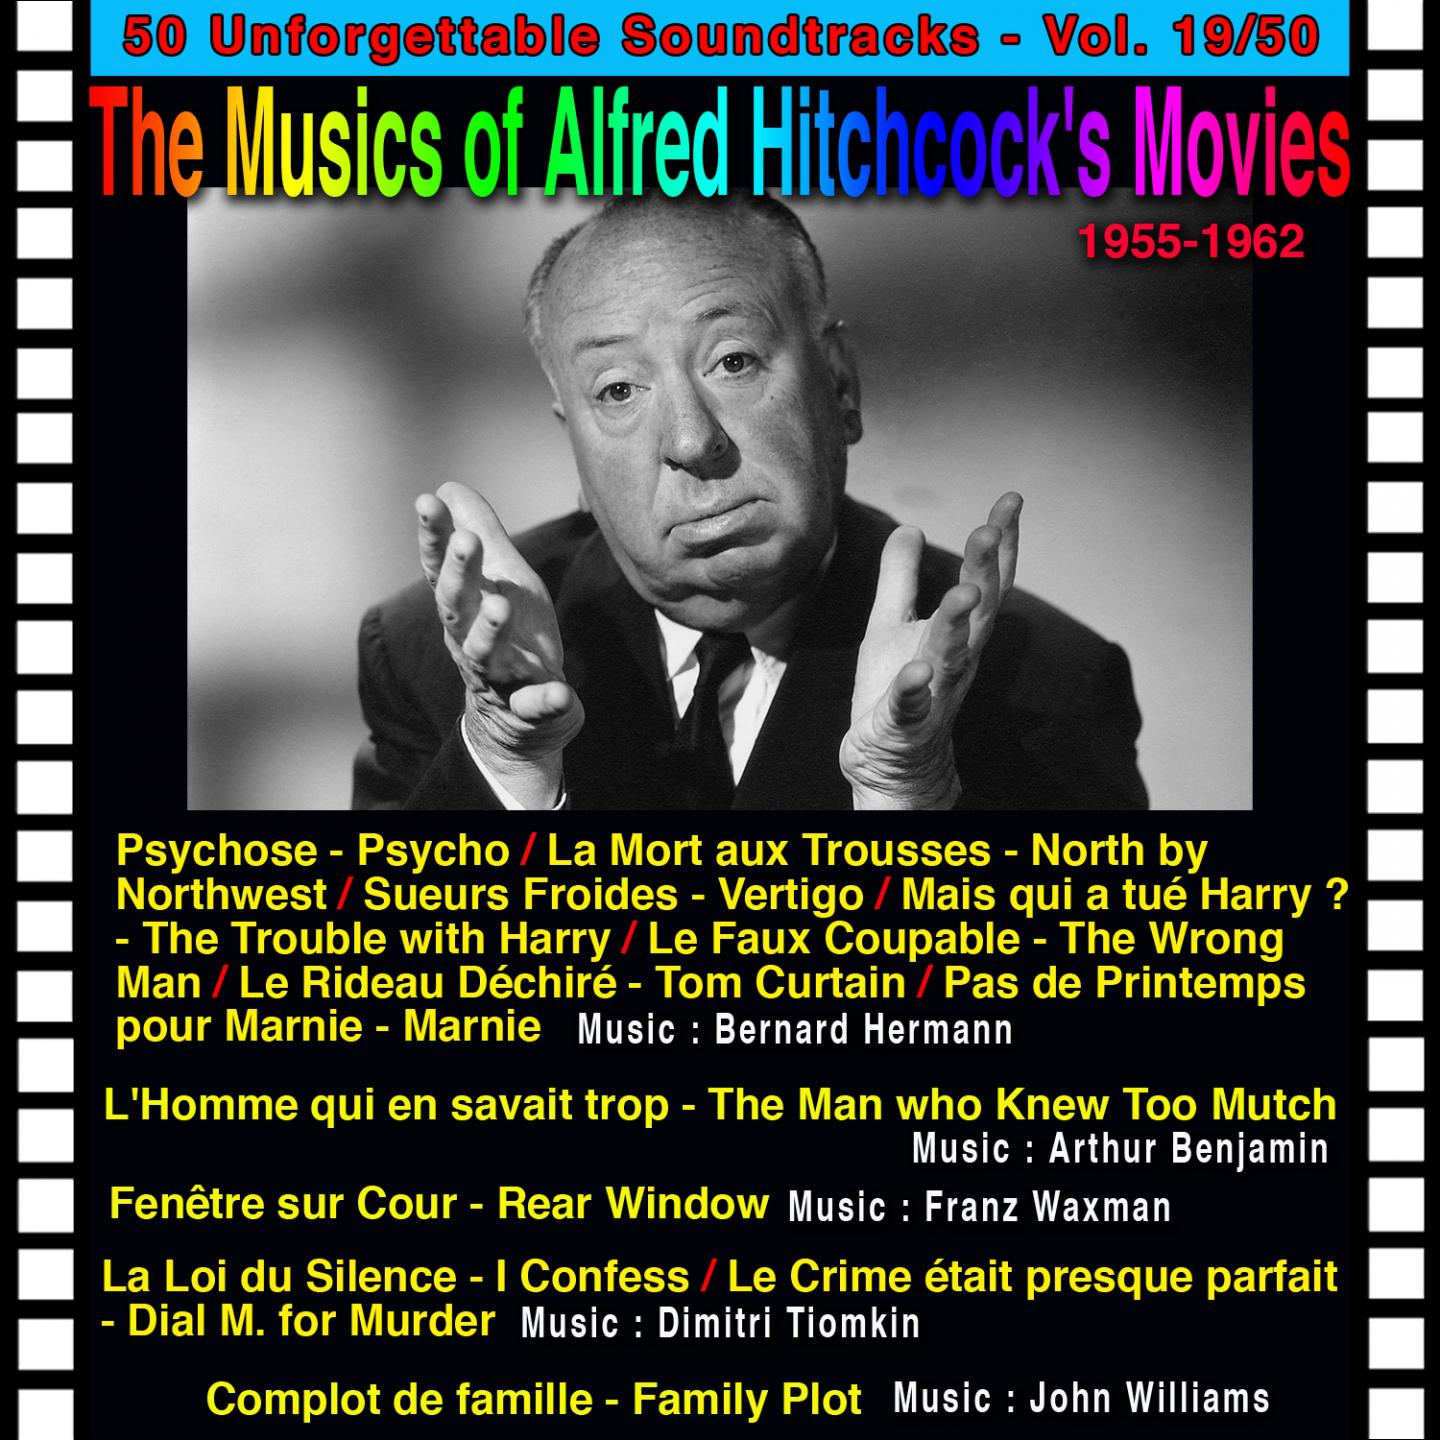 Le Rideau De chire  Tom Curtain: The Ship, the Radiogram Alfred Hitchcock 19551962